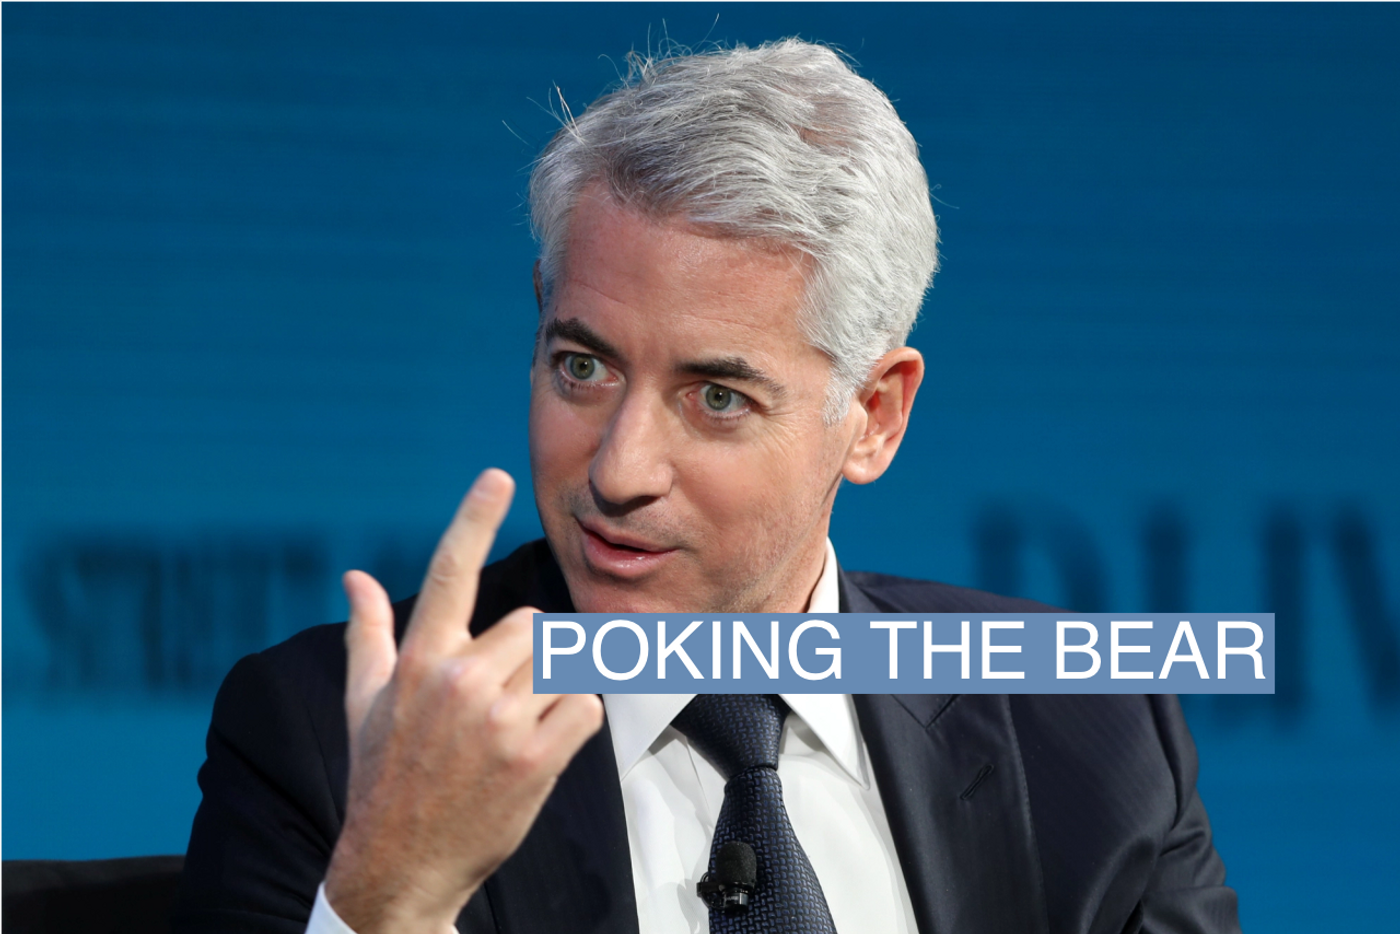 Fascist hedge funder Bill Ackman’s latest fight turns personal – again (semafor.com)